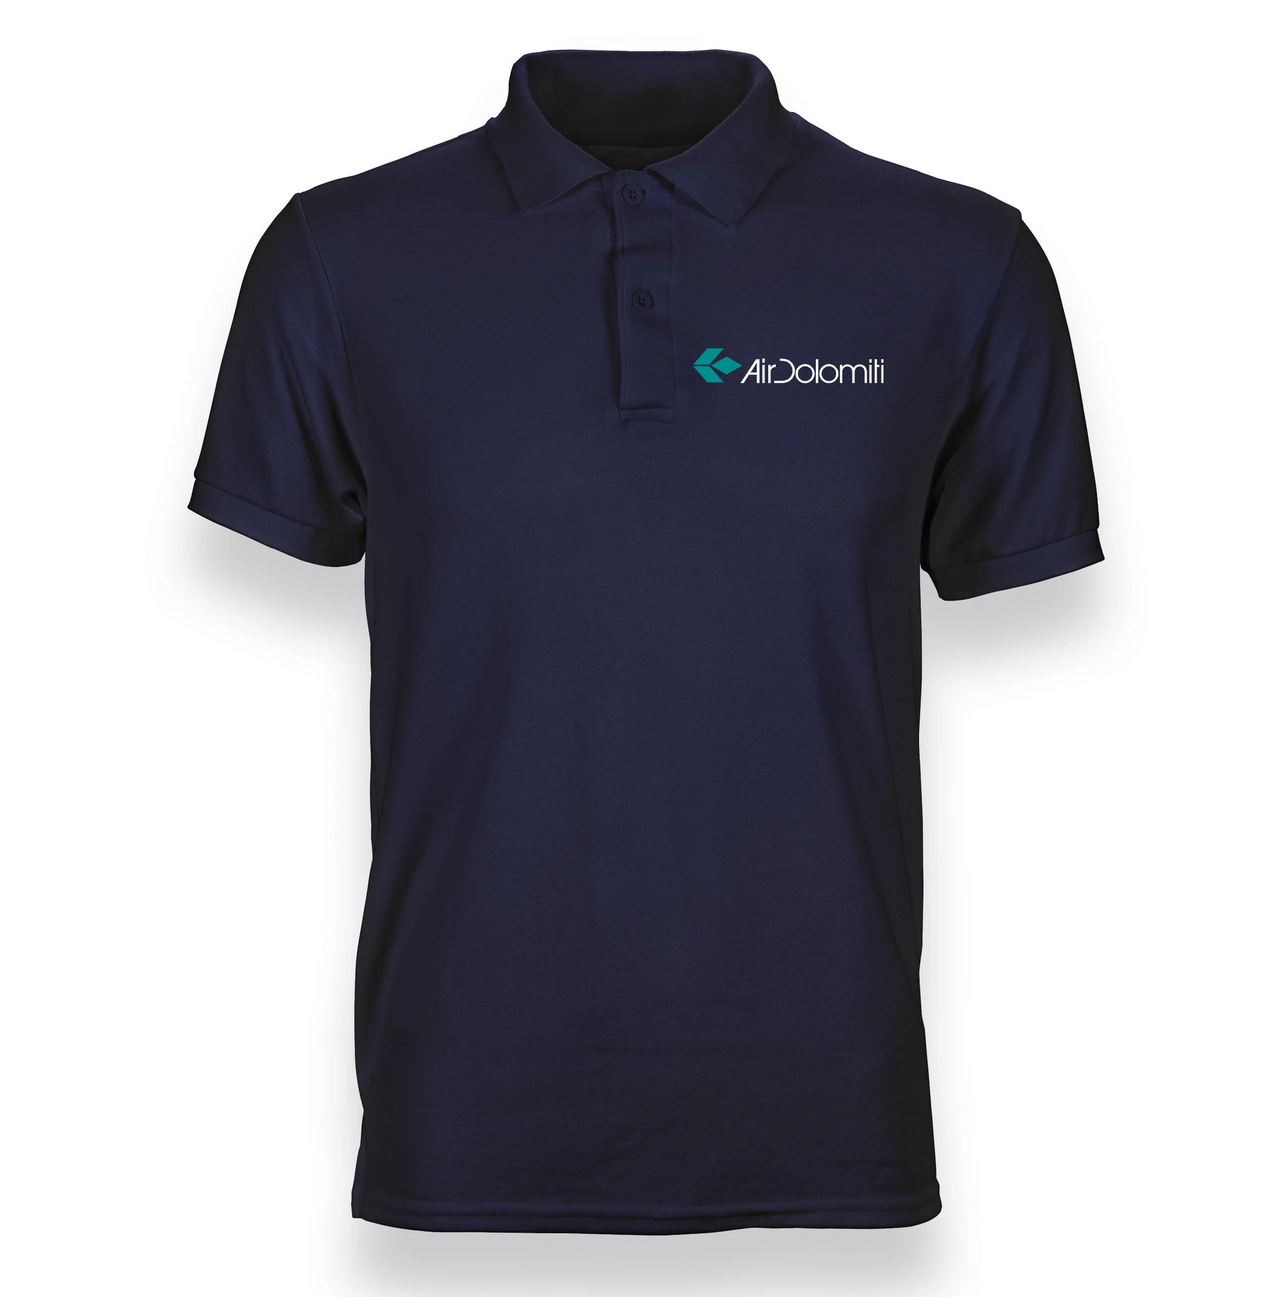 COLOMITI AIRLINES POLO T-SHIRT